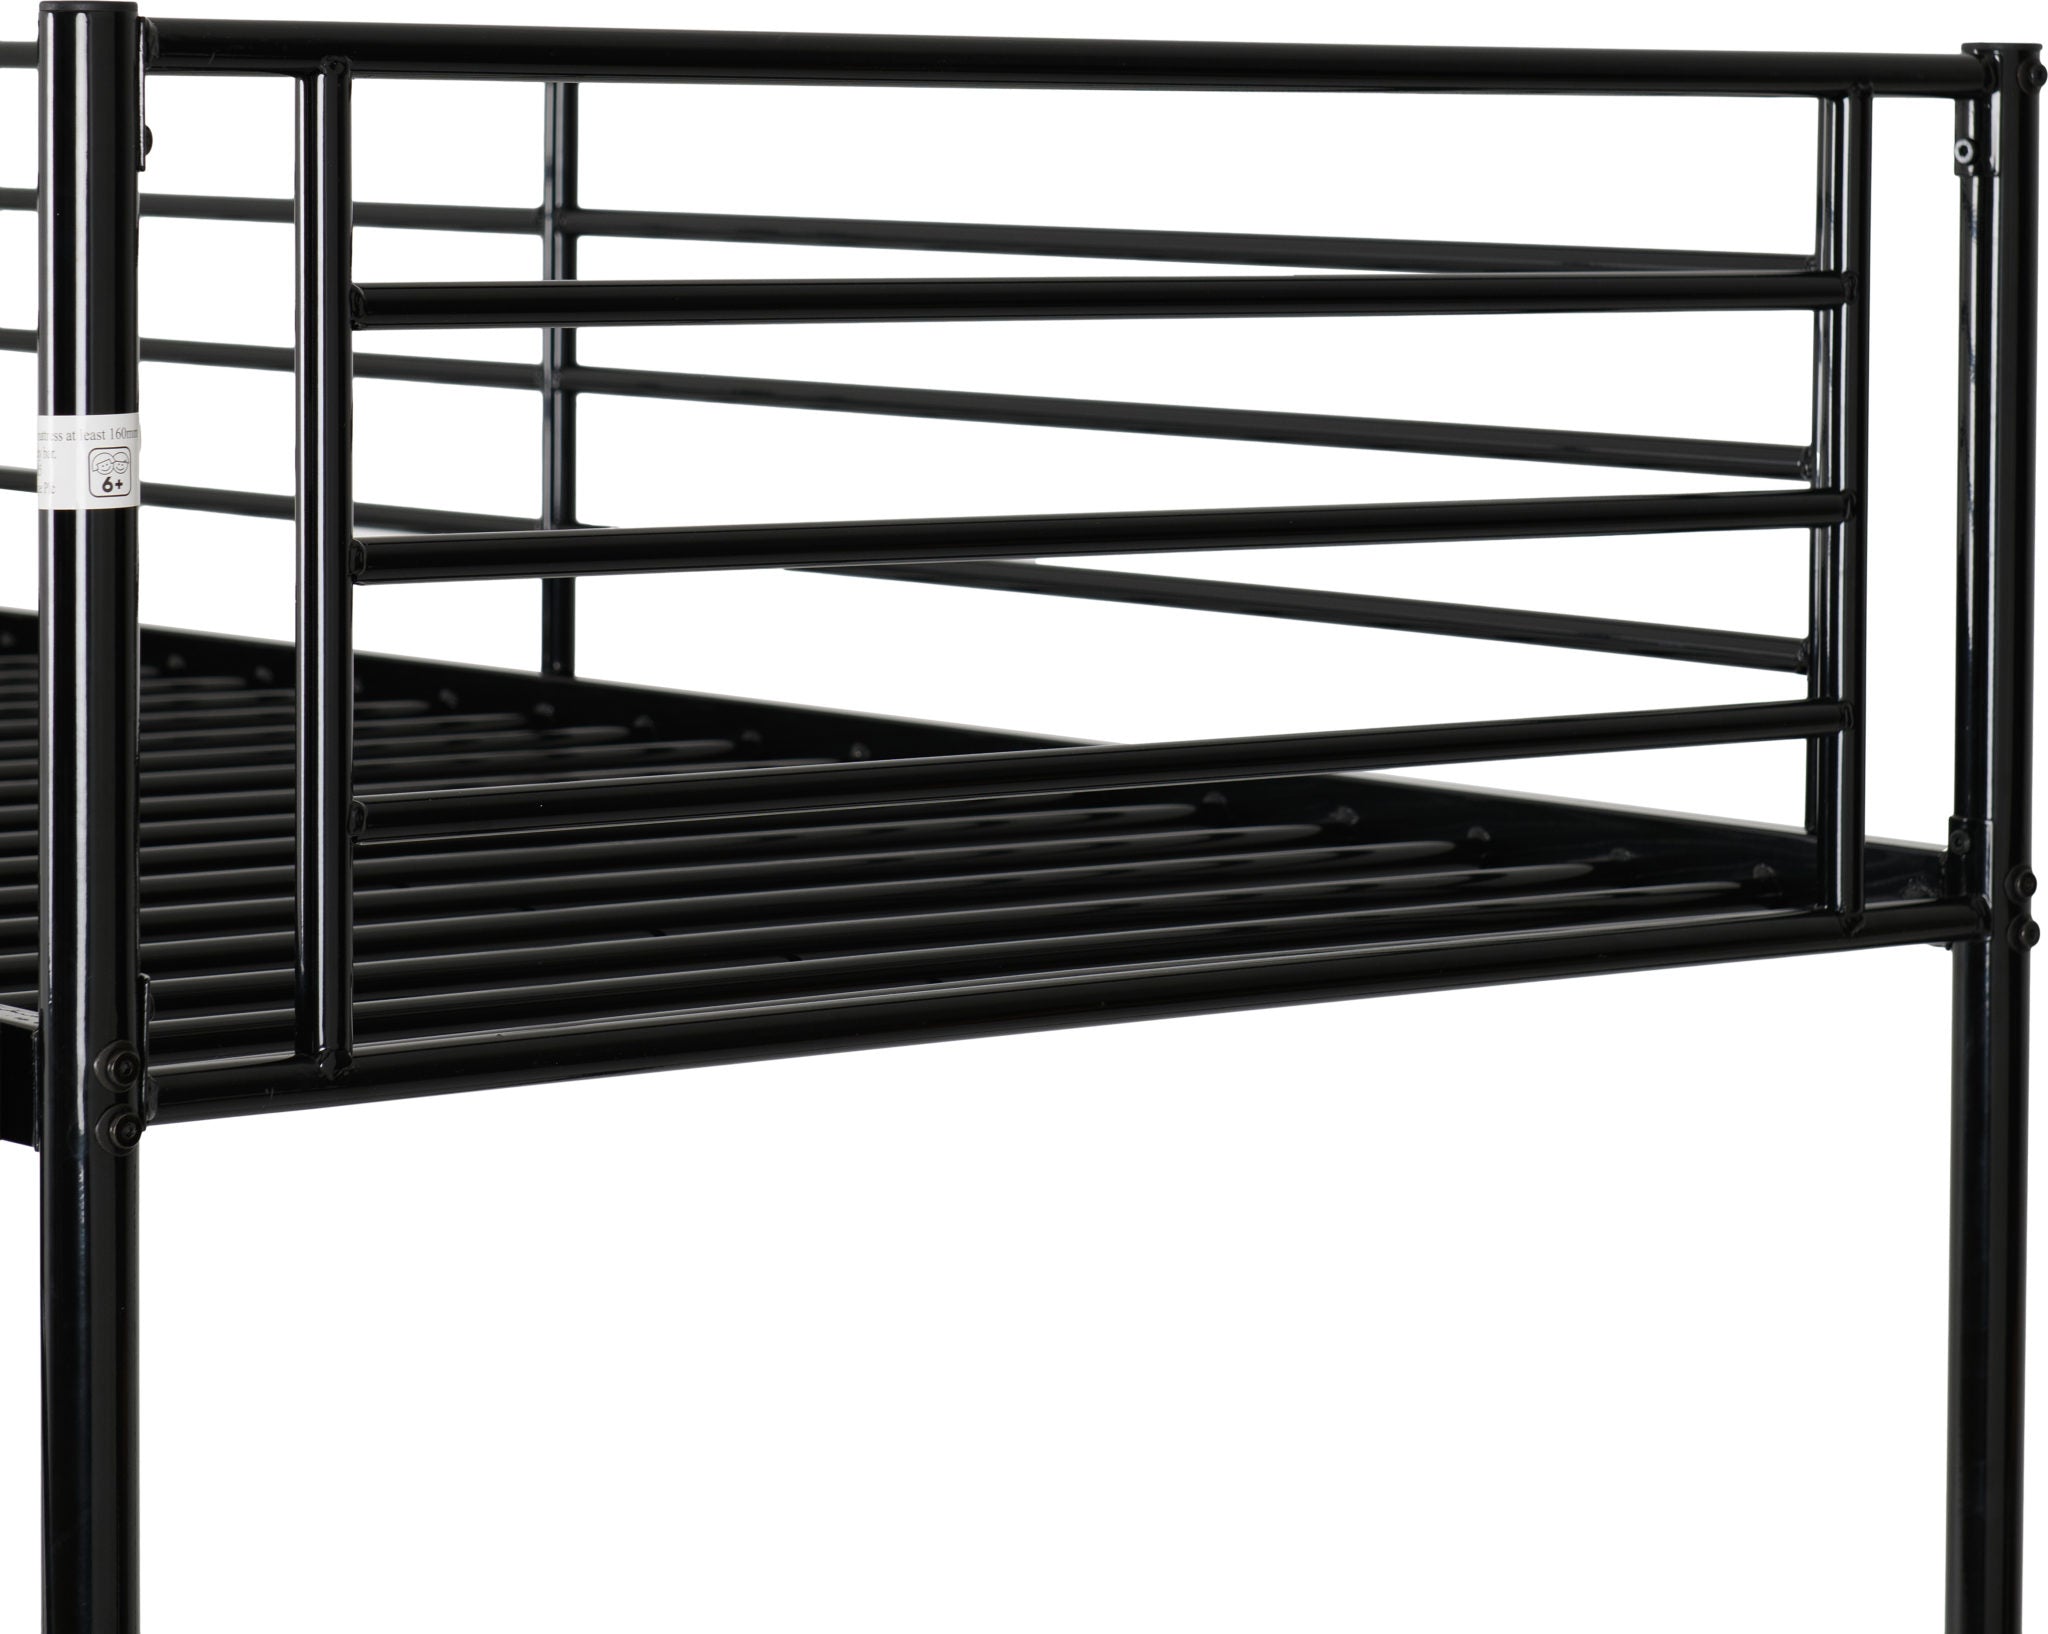 Brandon 3' Bunk Bed/2 x Mattresses in Black flat-packed for easy home assembly